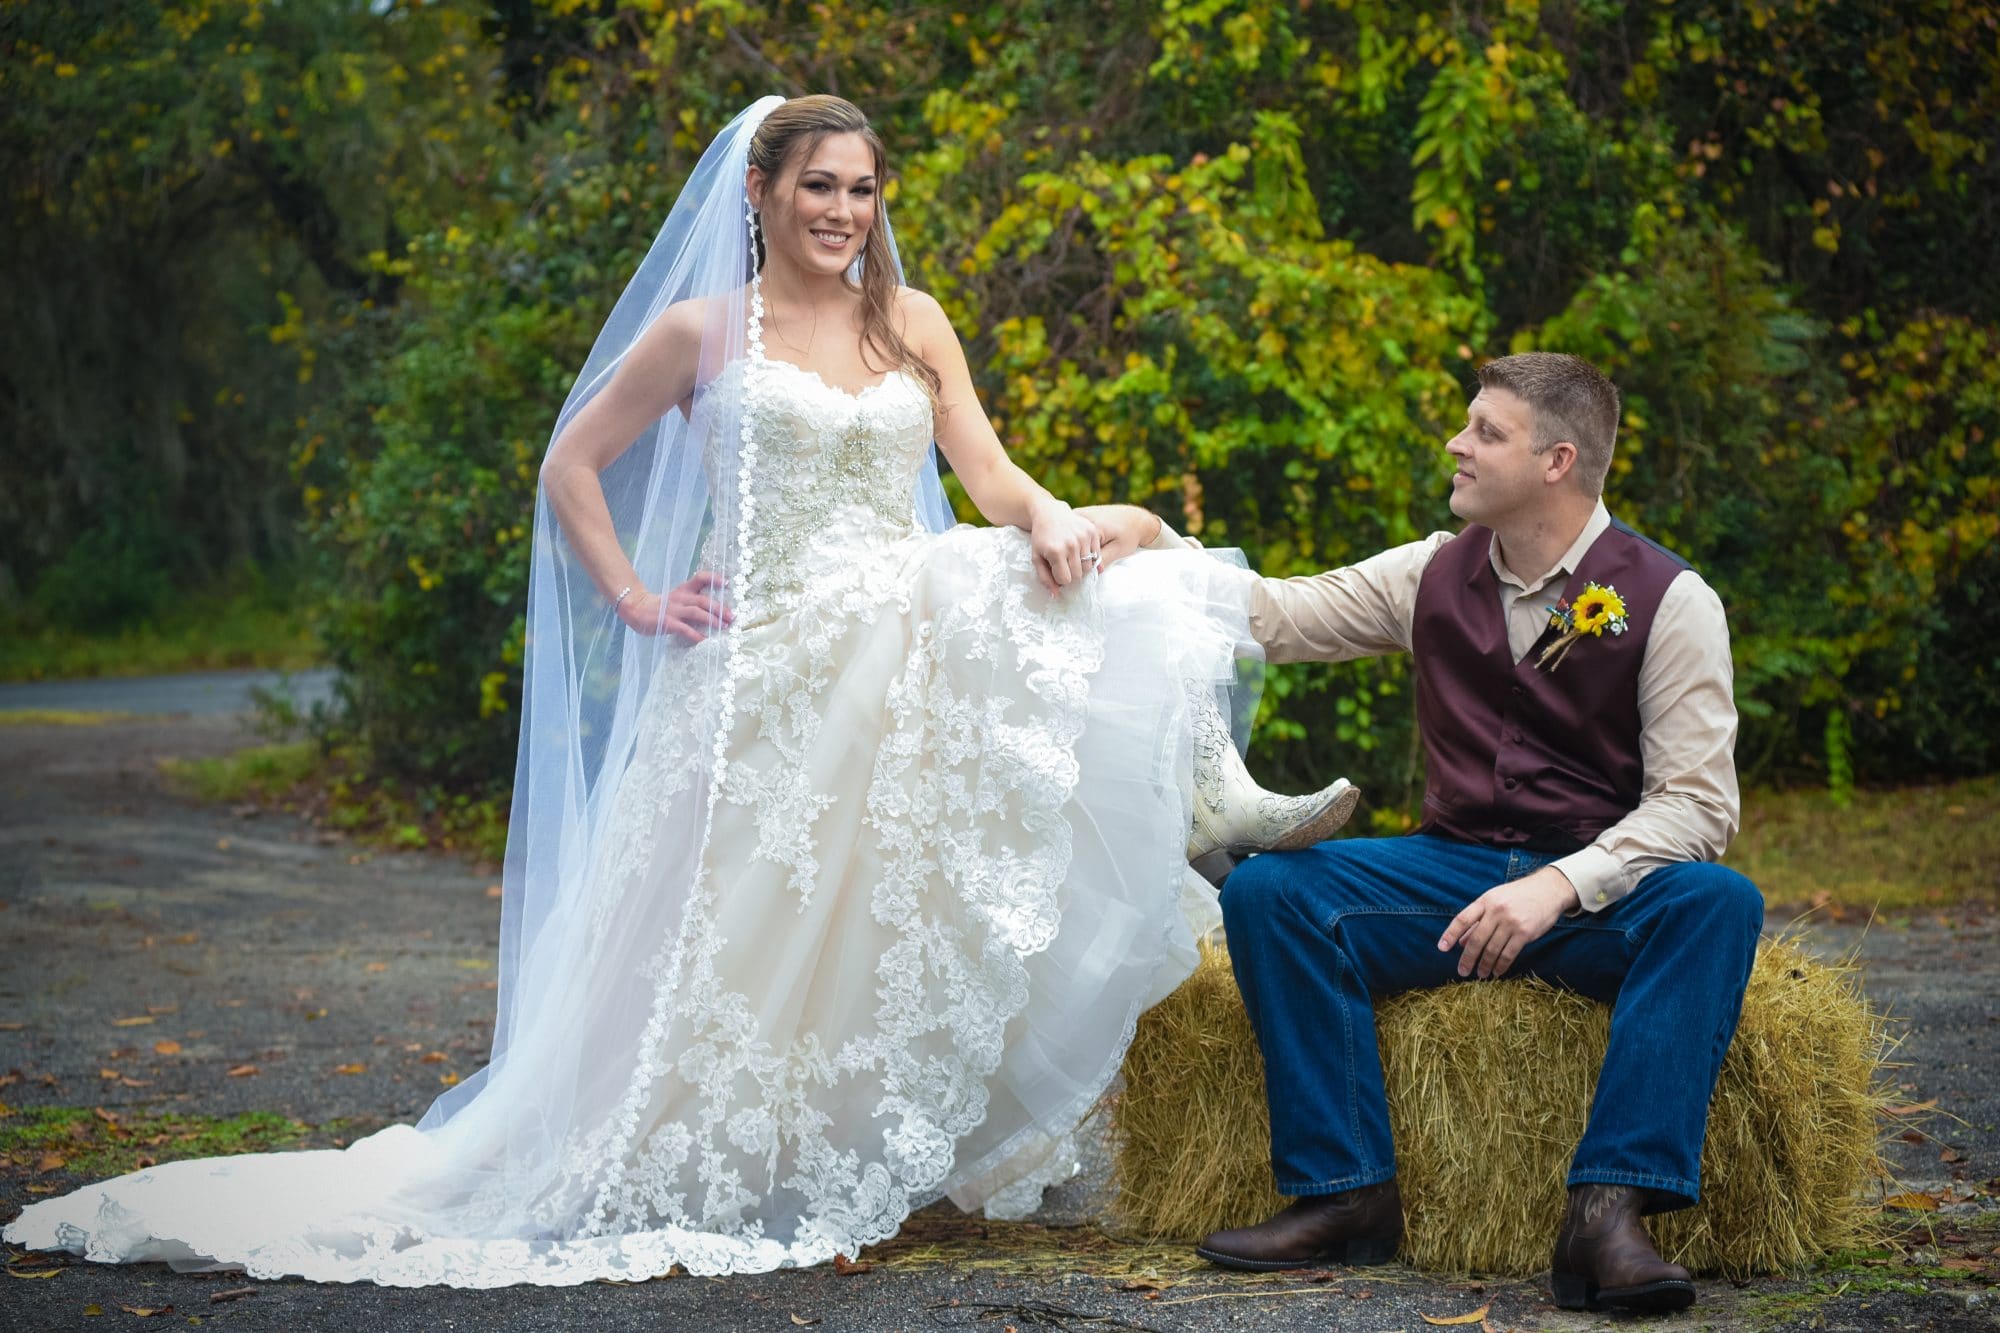 Chris Gillyard Photography - country newlyweds posing on bale of hay